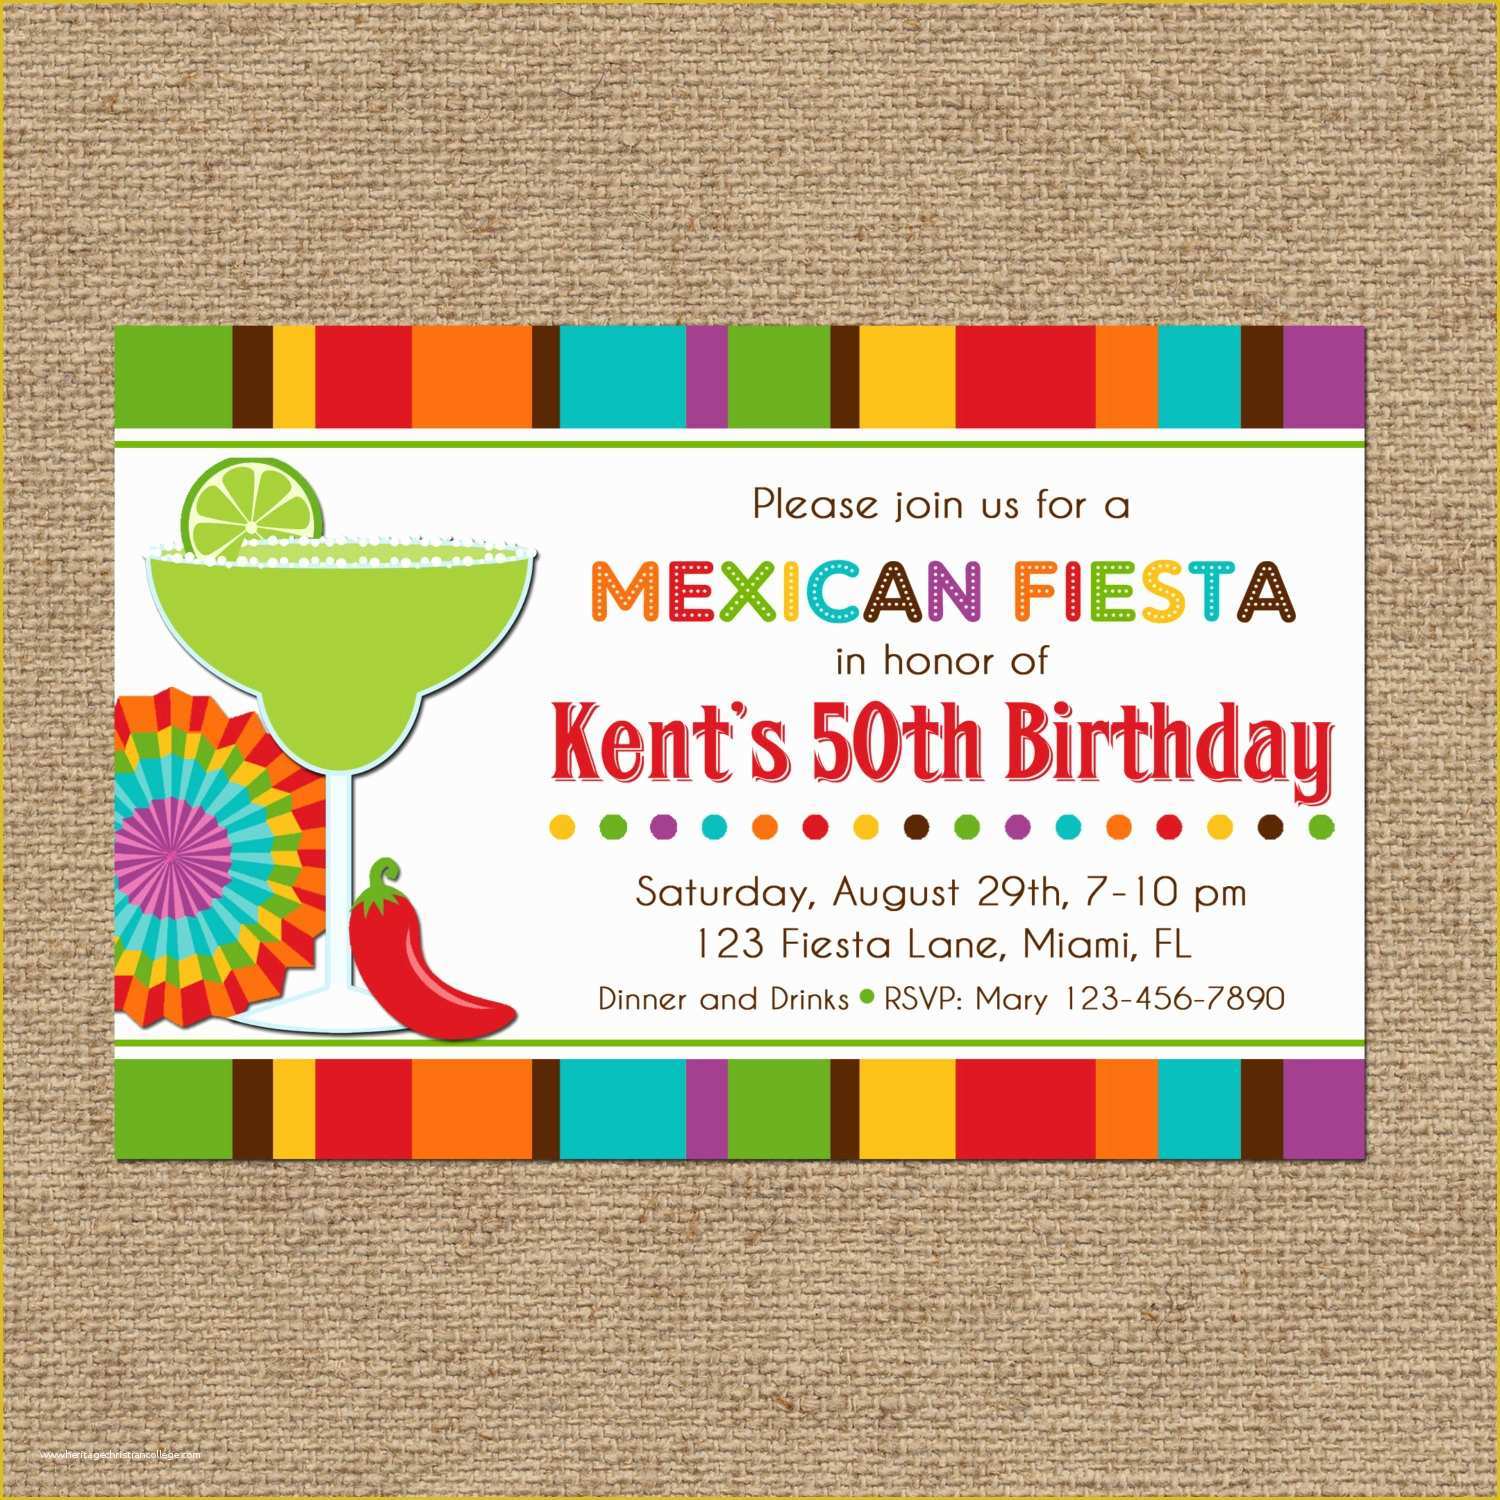 Mexican Fiesta Invitation Templates Free Of Mexican Fiesta Party Invitation Printable or Printed with Free